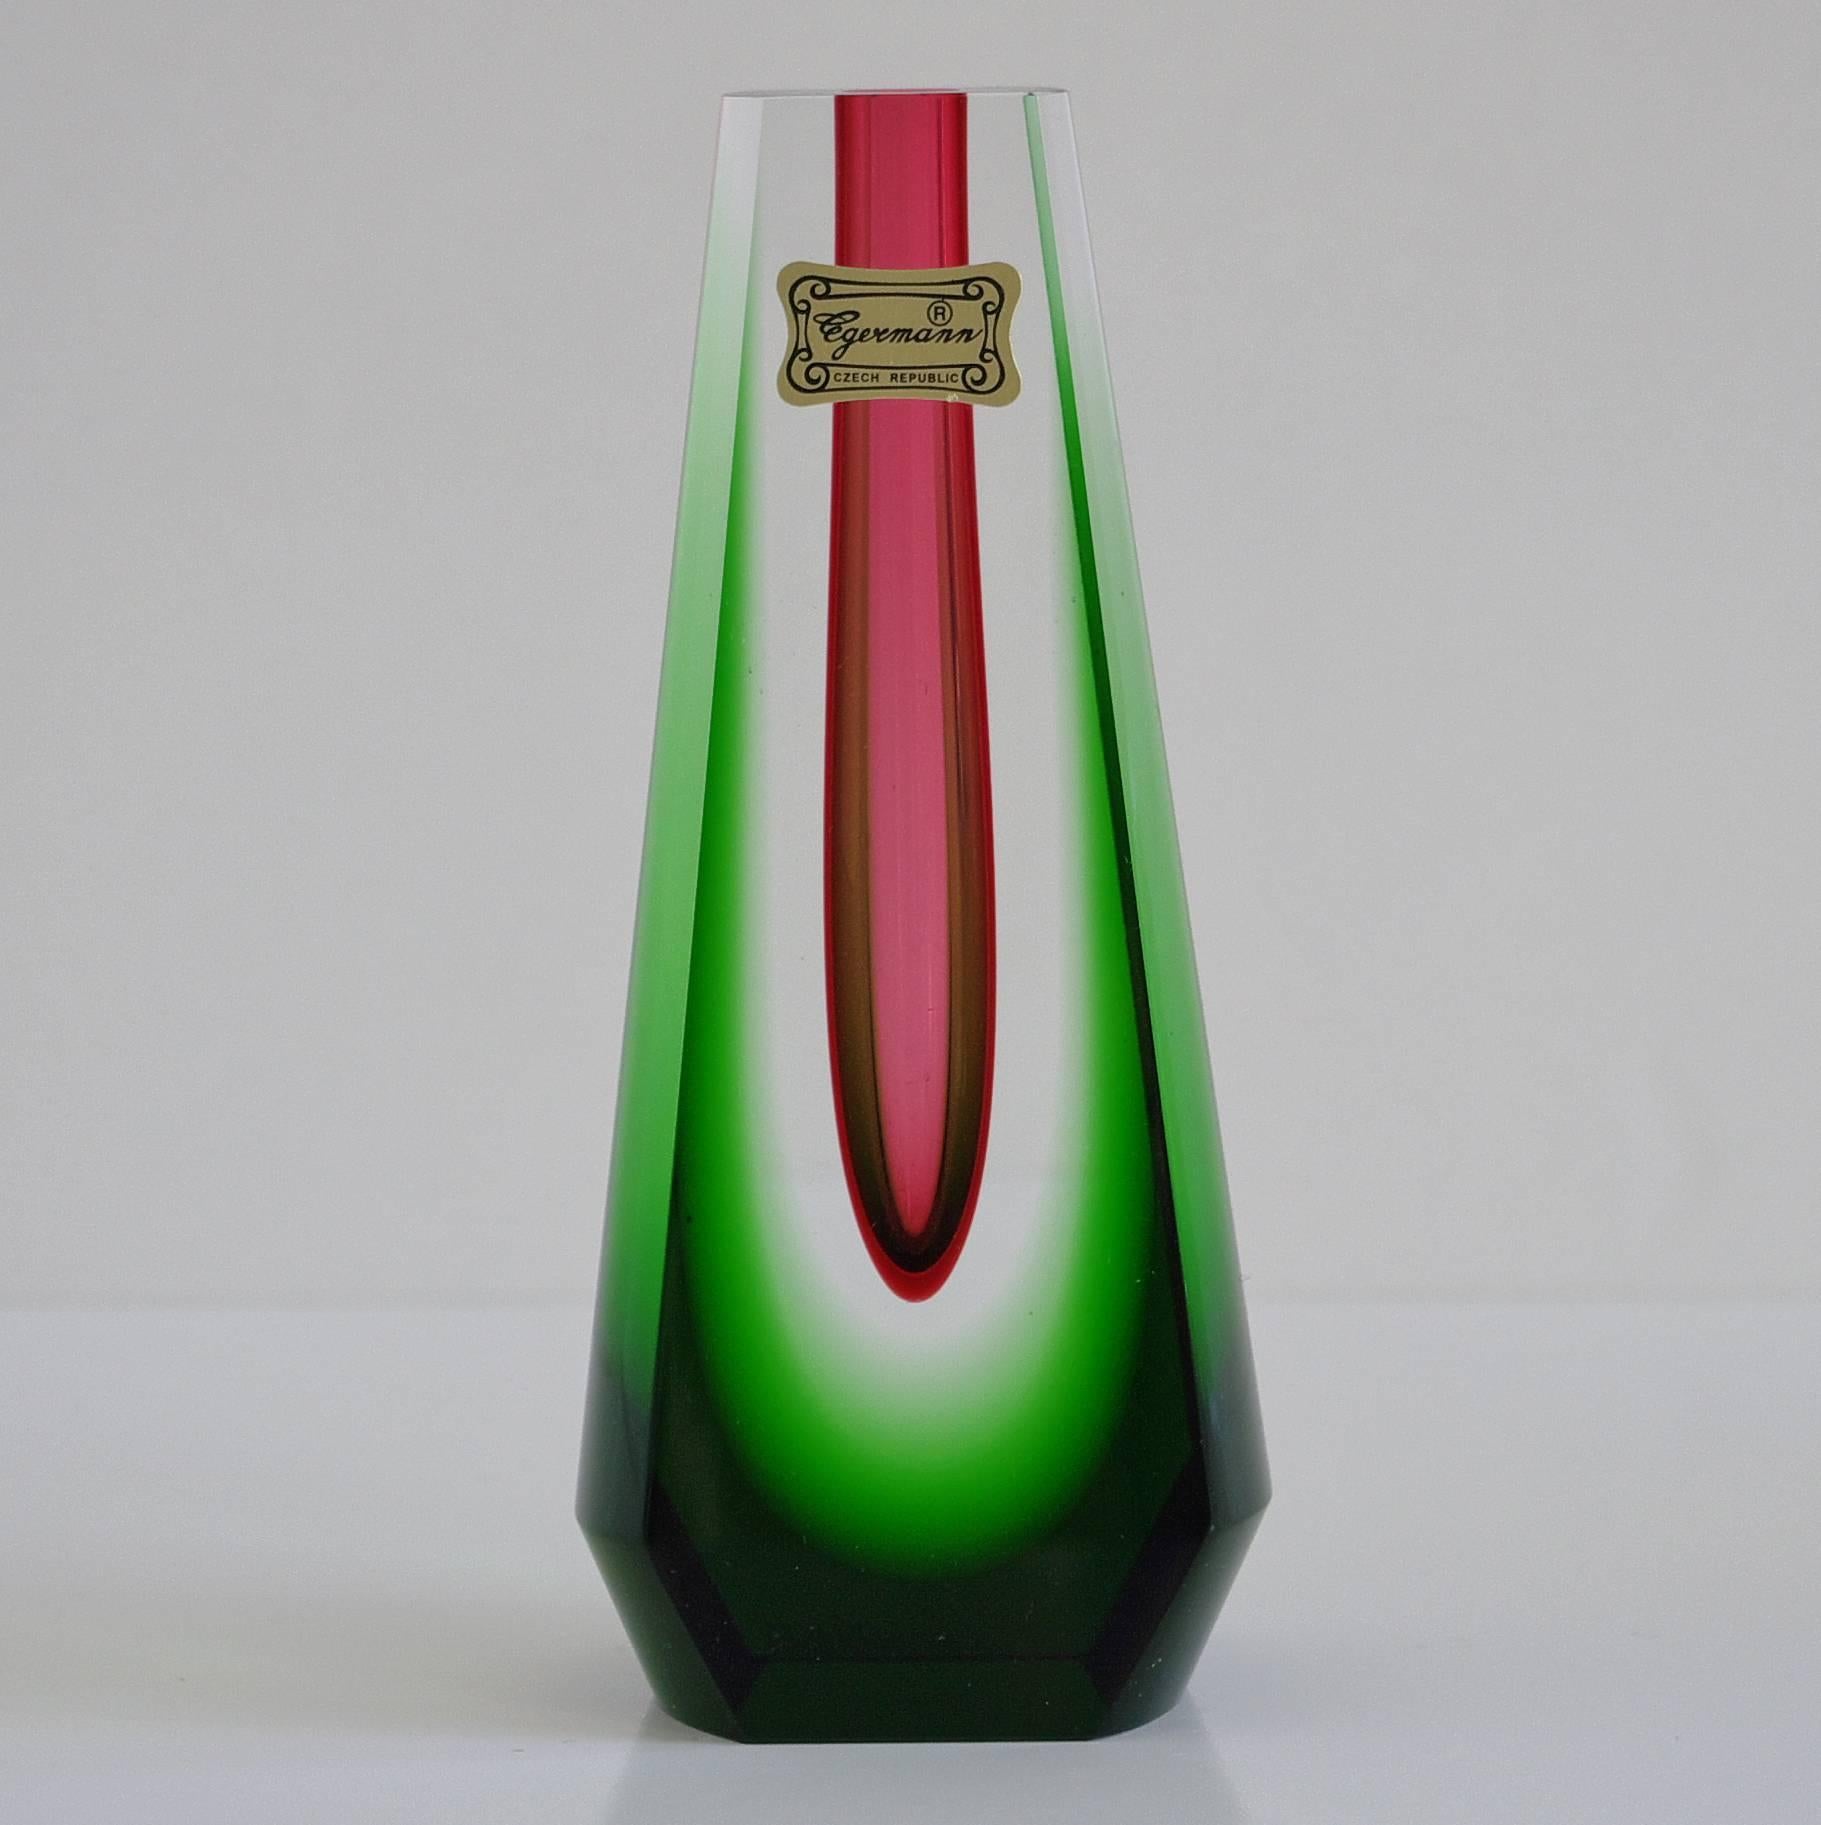 Green and amethyst faceted bohemia crystal vase by Friedrich Egermann
Made in the Czech Republic in the 1990s, with original sticker
Height: 6 inches / Width: 2.5 inches / Depth: 1.5 inches
1 in stock in Palm Springs currently ON FINAL CLEARANCE